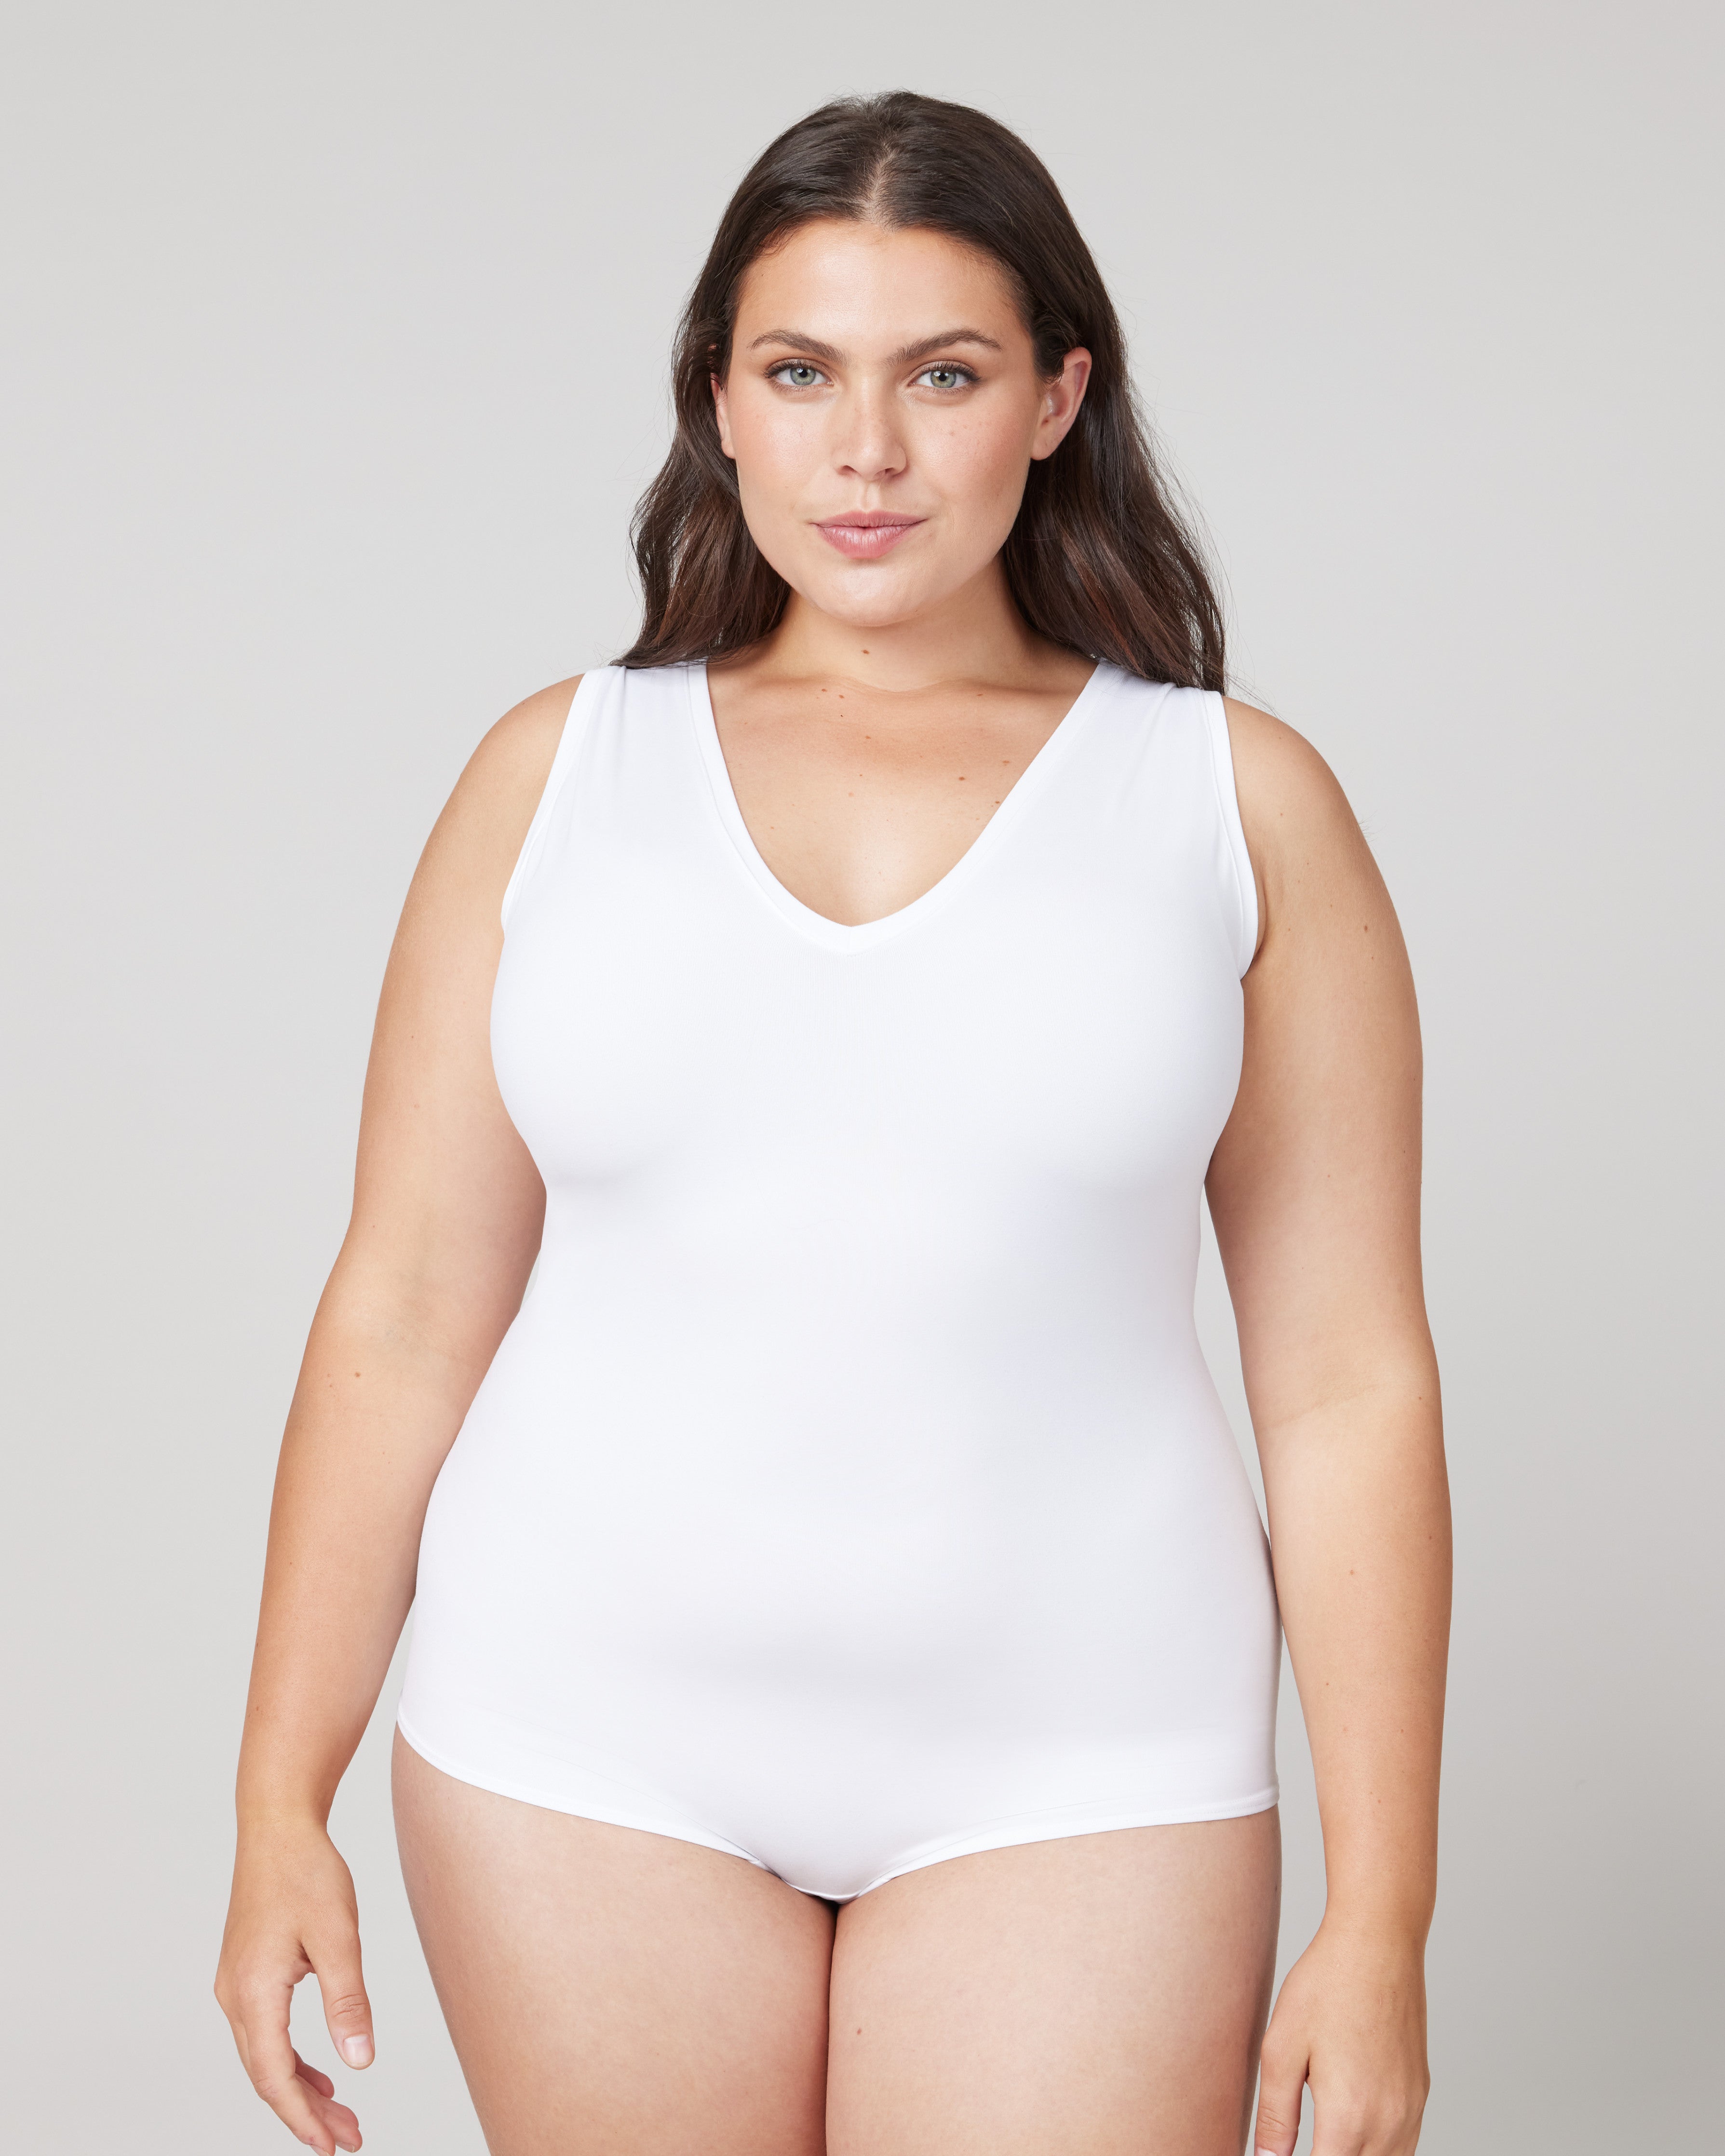 The Suit Yourself Boat Neck Ribbed Bodysuit by Spanx– MomQueenBoutique